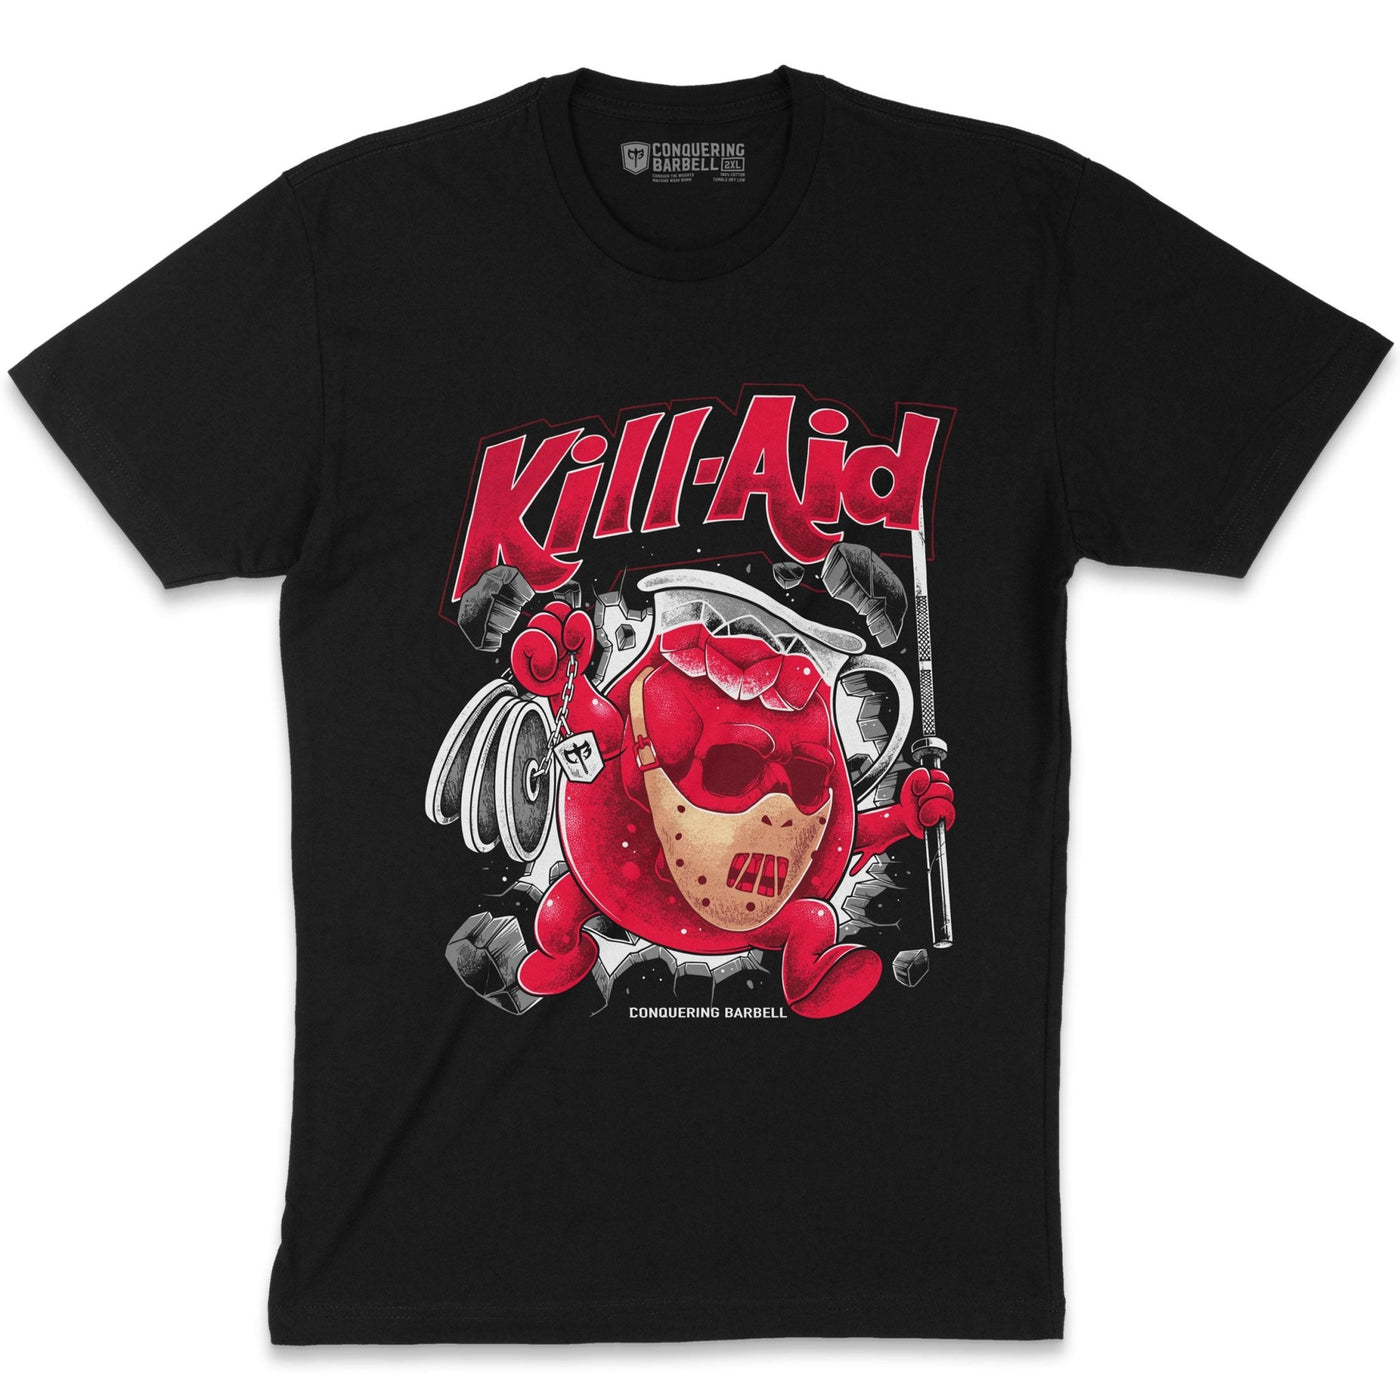 Kill-Aid - on Black tee - Conquering Barbell